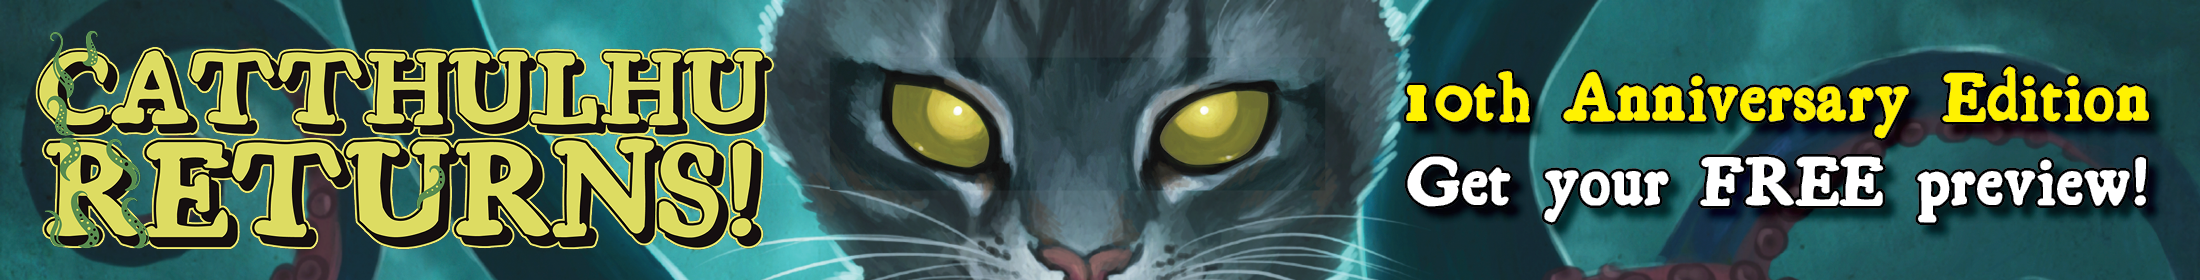 Cats of Catthulhu 10th Anniversary PREVIEW